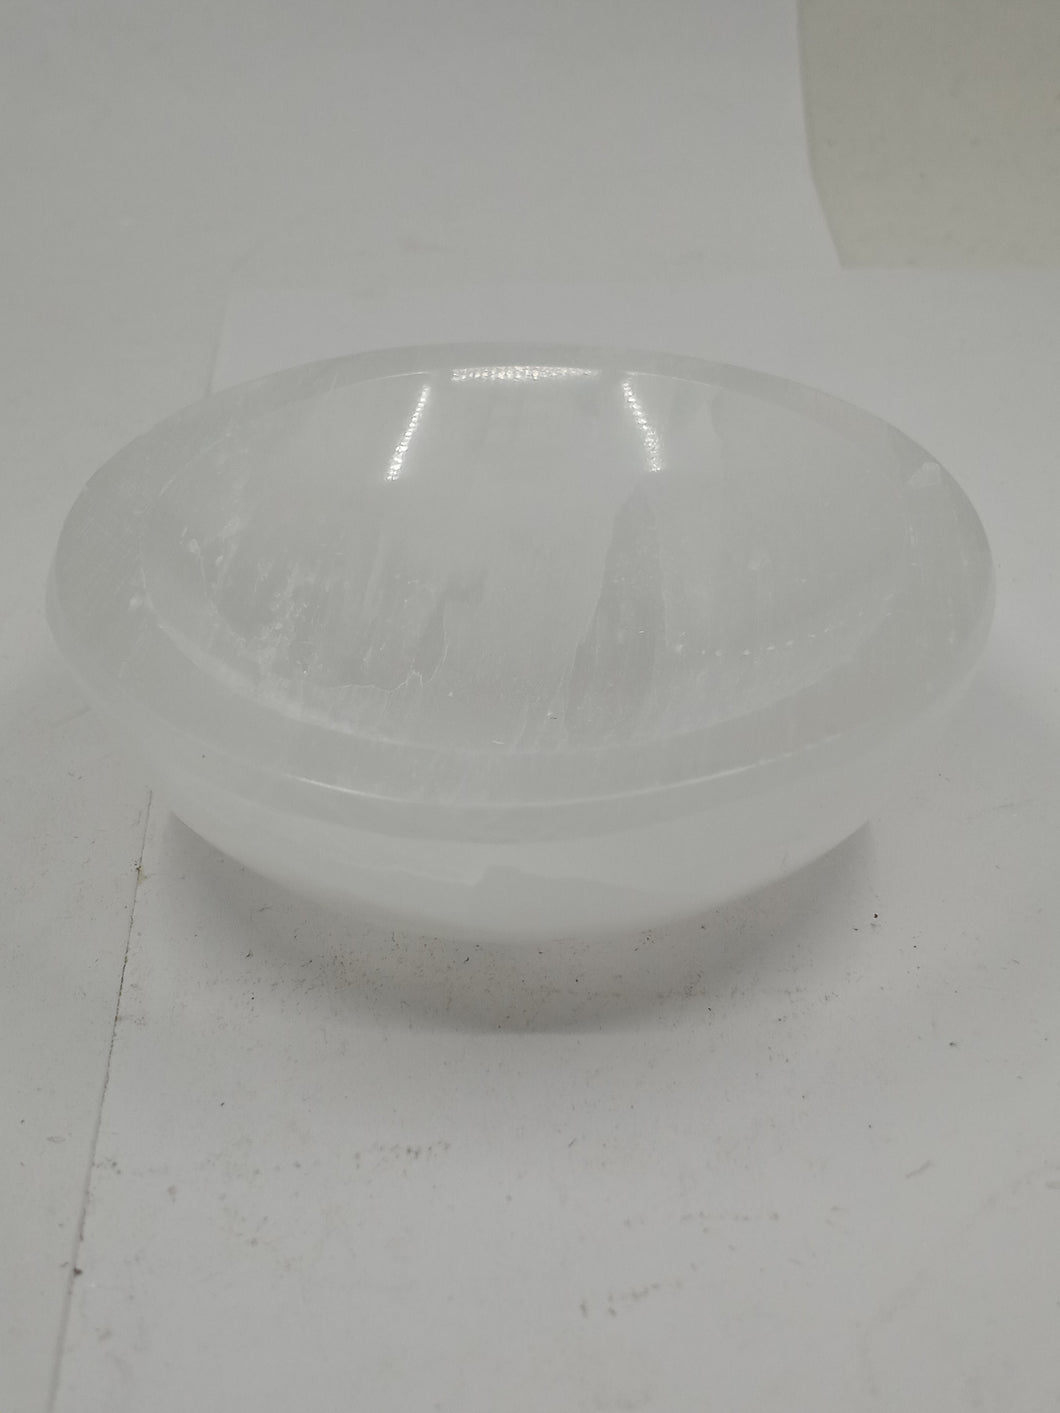  A clear Selenite Bowl placed on a white background.